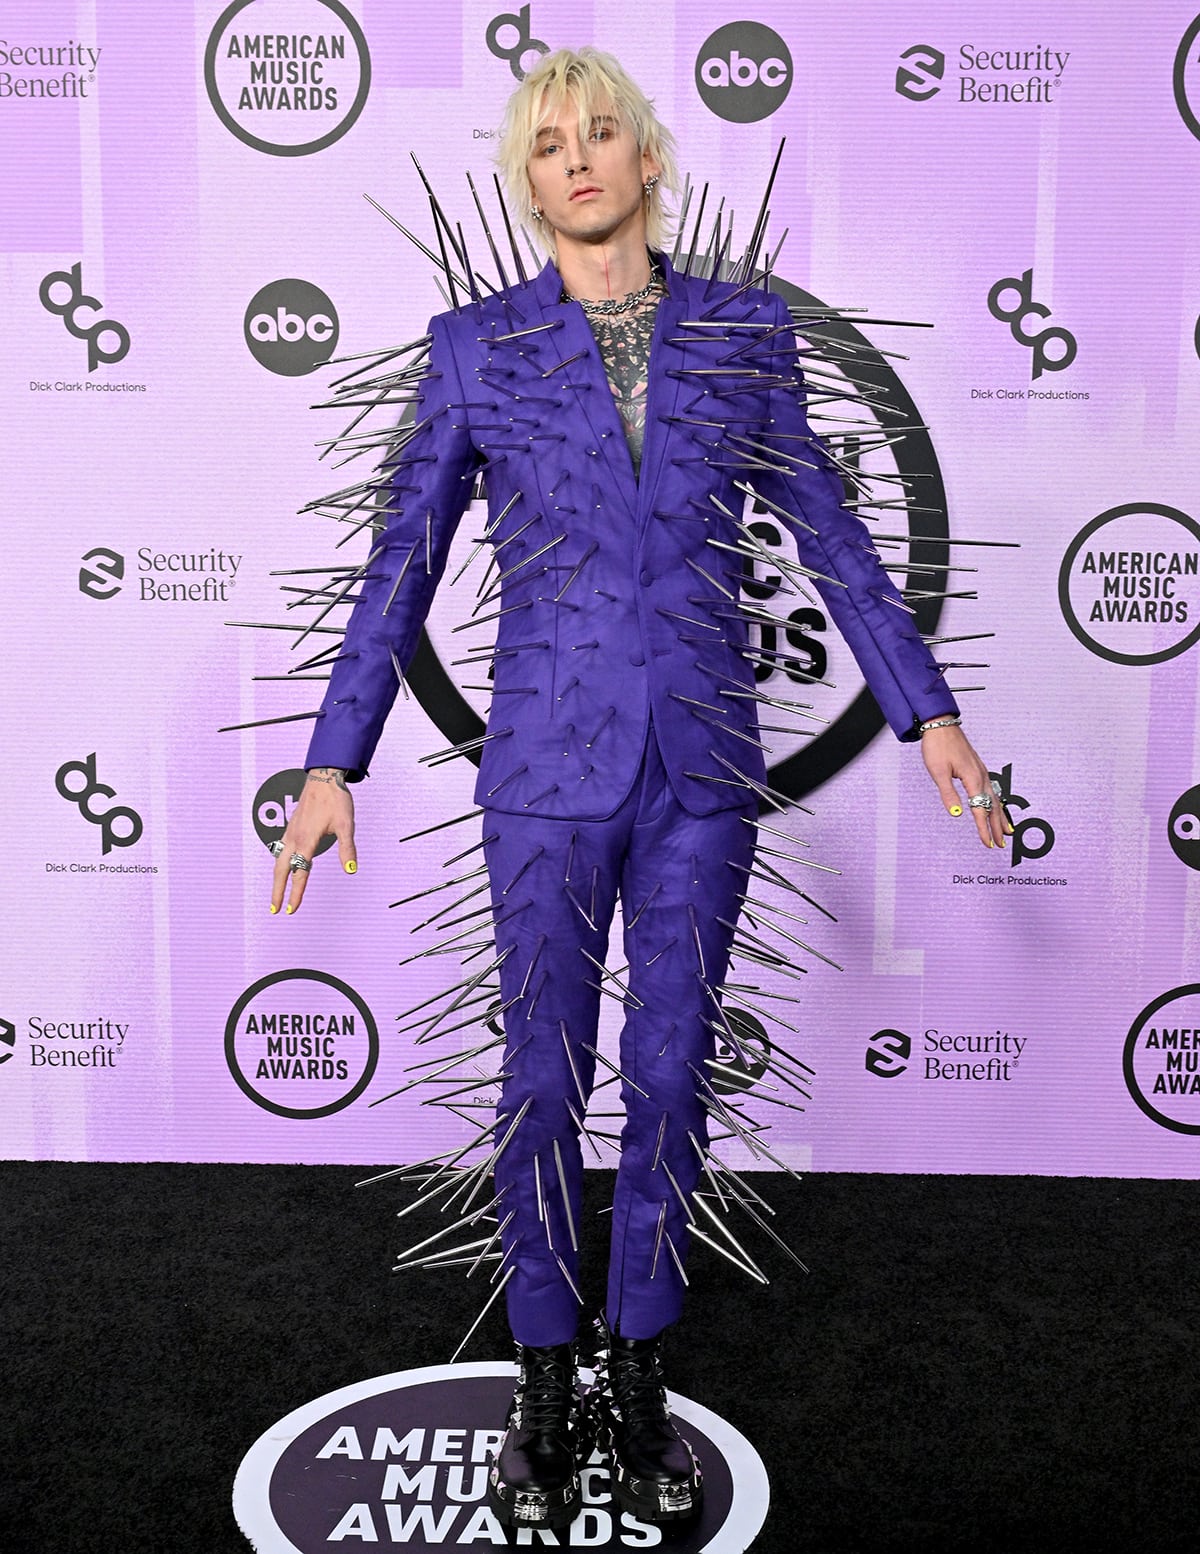 Machine Gun Kelly takes home the Favorite Rock Artist award in a purple suit embellished with long gunmetal spikes